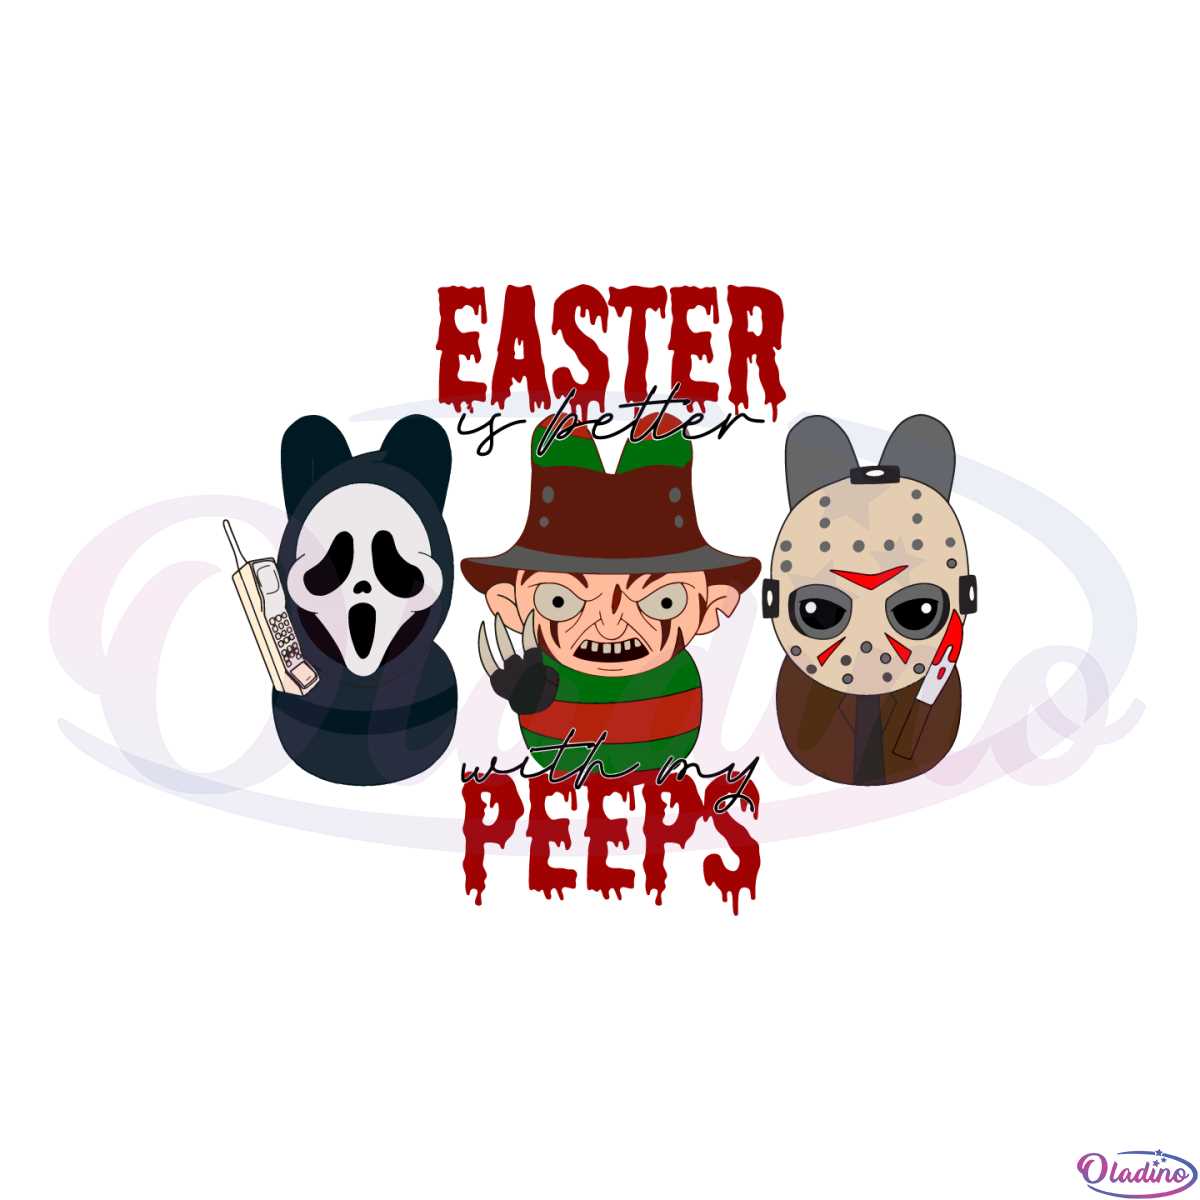 easter-is-better-with-my-peeps-horror-movie-charater-easter-peeps-svg